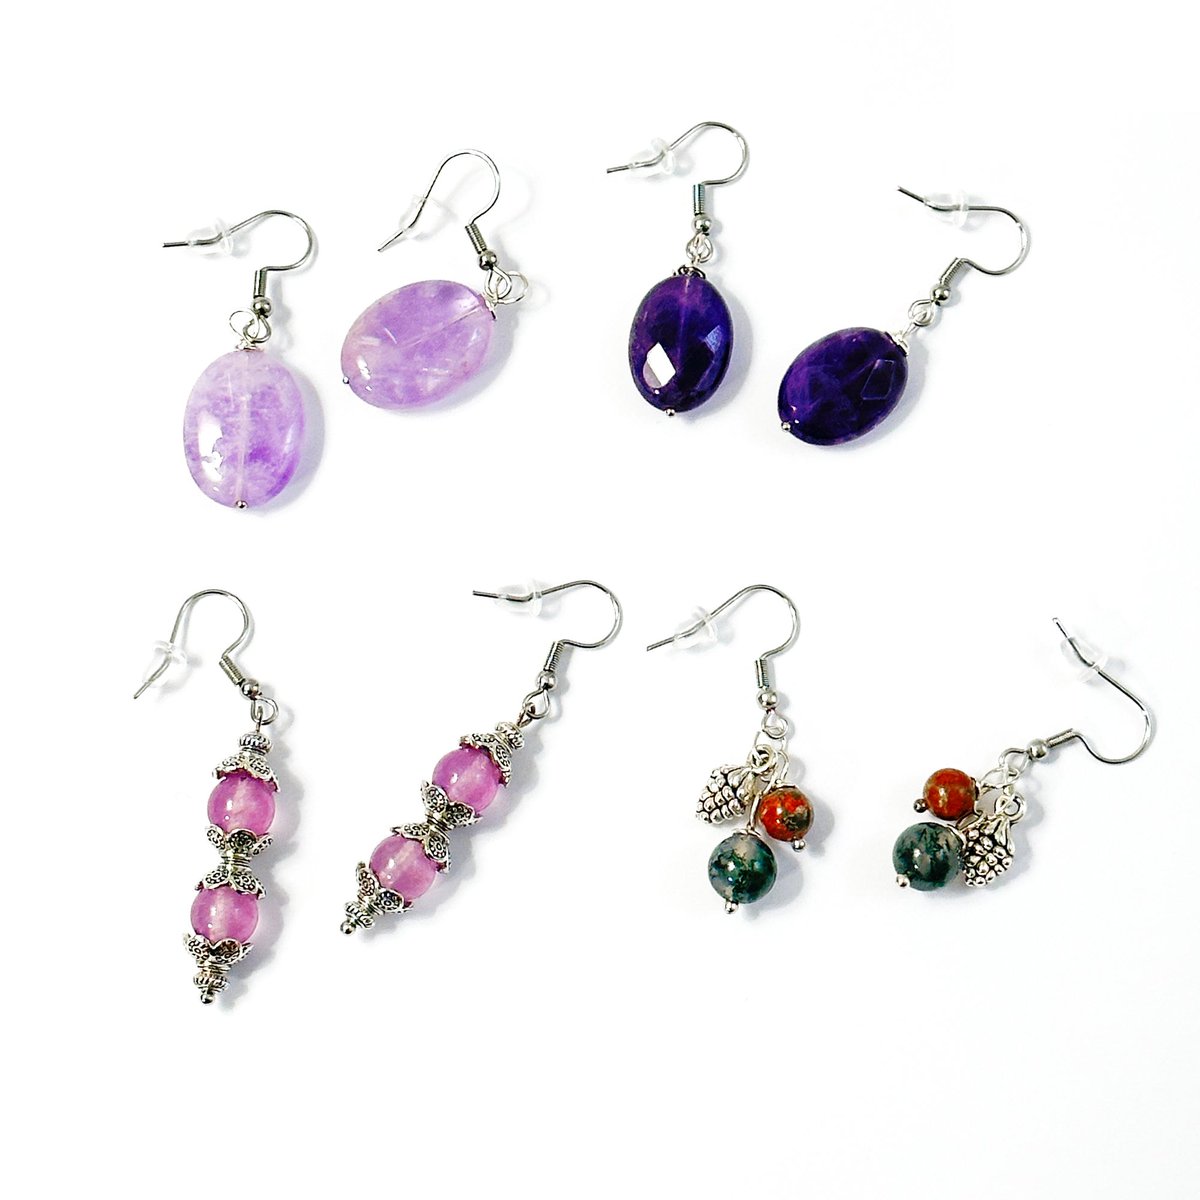 🐕 Big deals! Drop Earrings with French Hook Gemstones and Stainless Steel Ear Wires and Silicone Backs only at $15.00 on etsy.com/listing/155605… Hurry. #DangleDrops #GemstoneEarrings